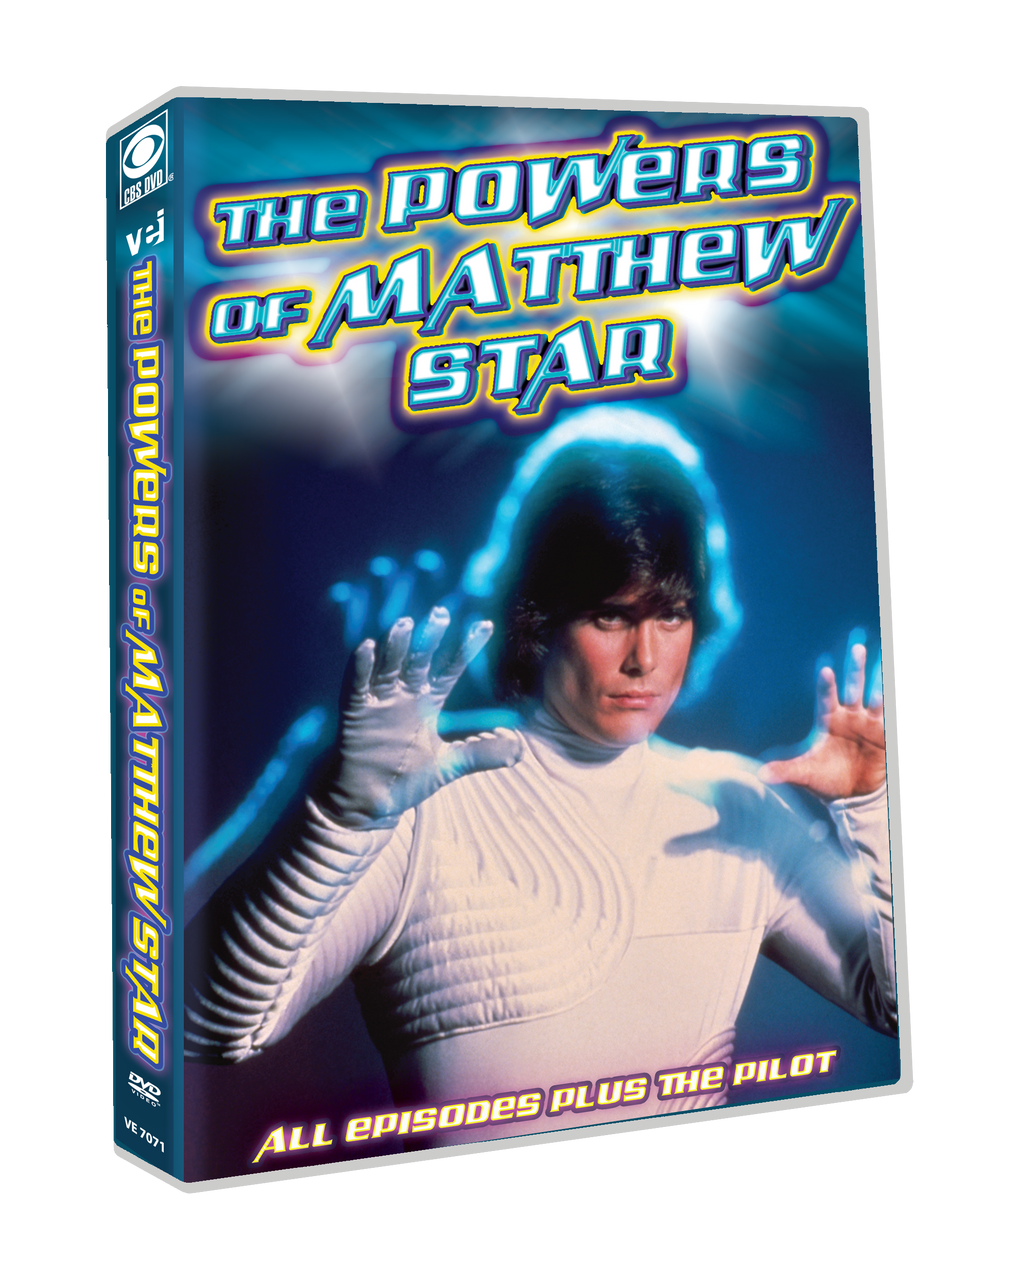 The Powers of Matthew Star - All Episodes plus The Pilot [DVD] #7071